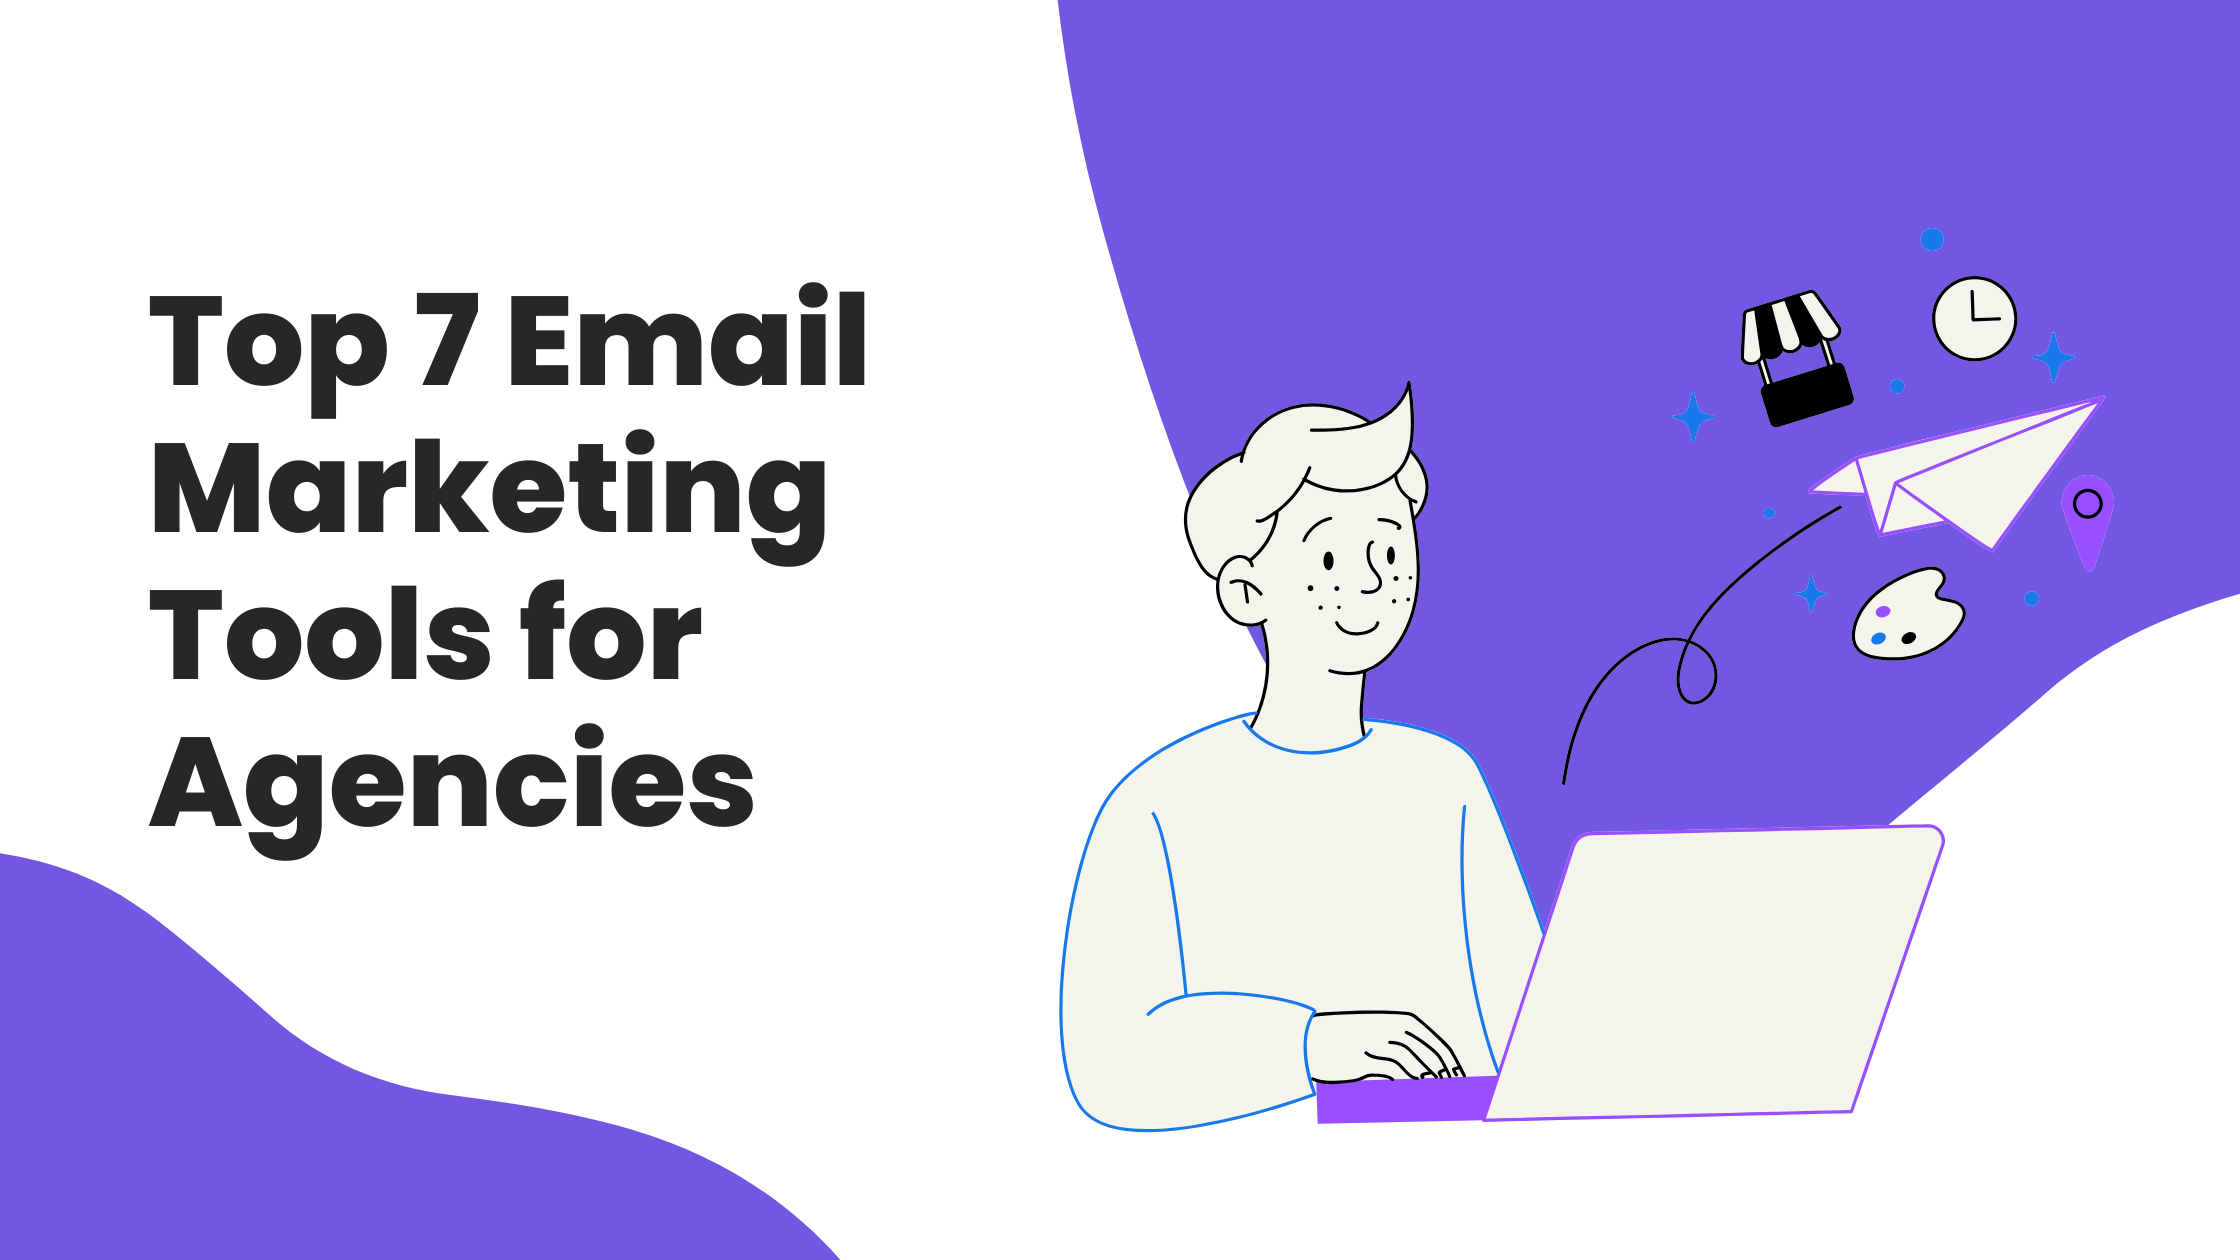 Top 7 Email Marketing Tools for Agencies